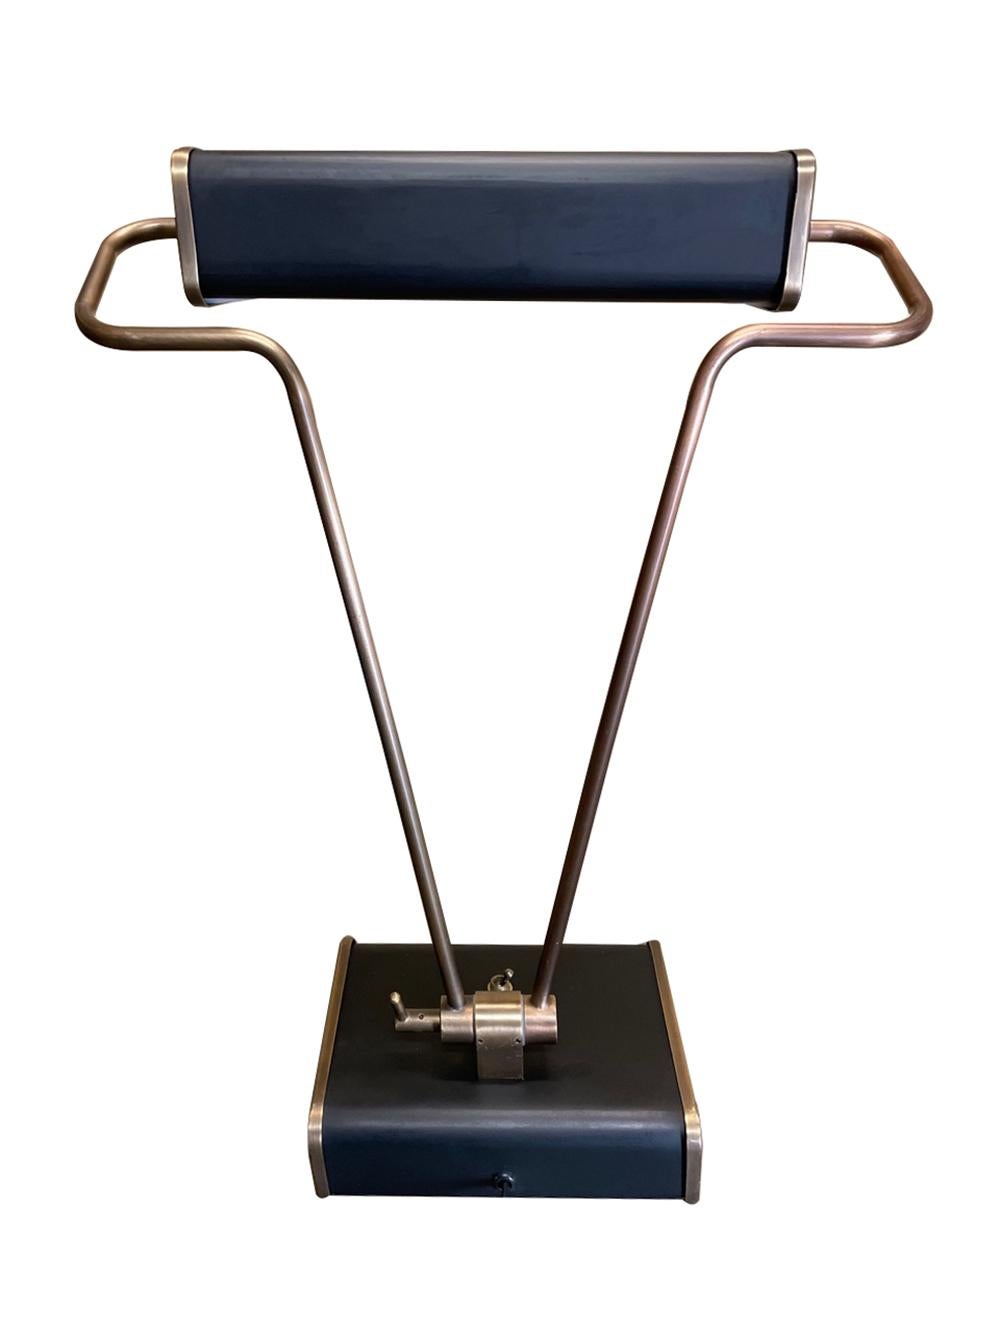 Chapman Lighting 1940s Brushed Brass and Ebonized Metal Articulated Desk Lamp In Good Condition For Sale In San Francisco, CA